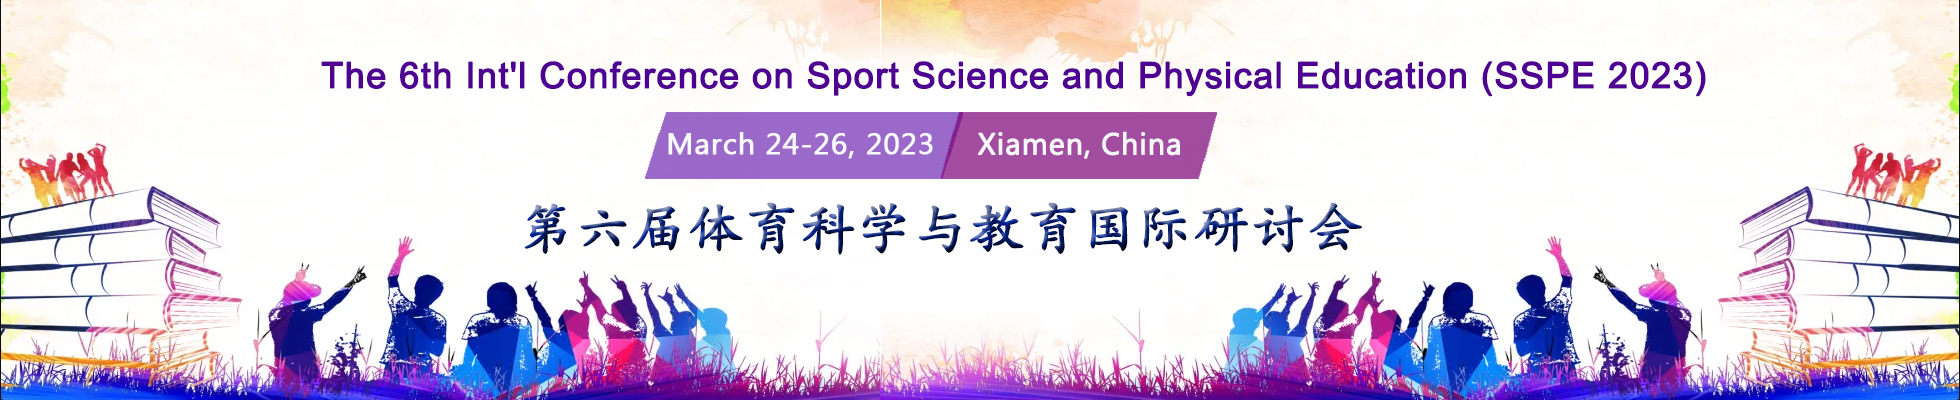 The 6th Int'l Conference on Sport Science and Physical Education (SSPE 2023), Xiamen, Fujian, China